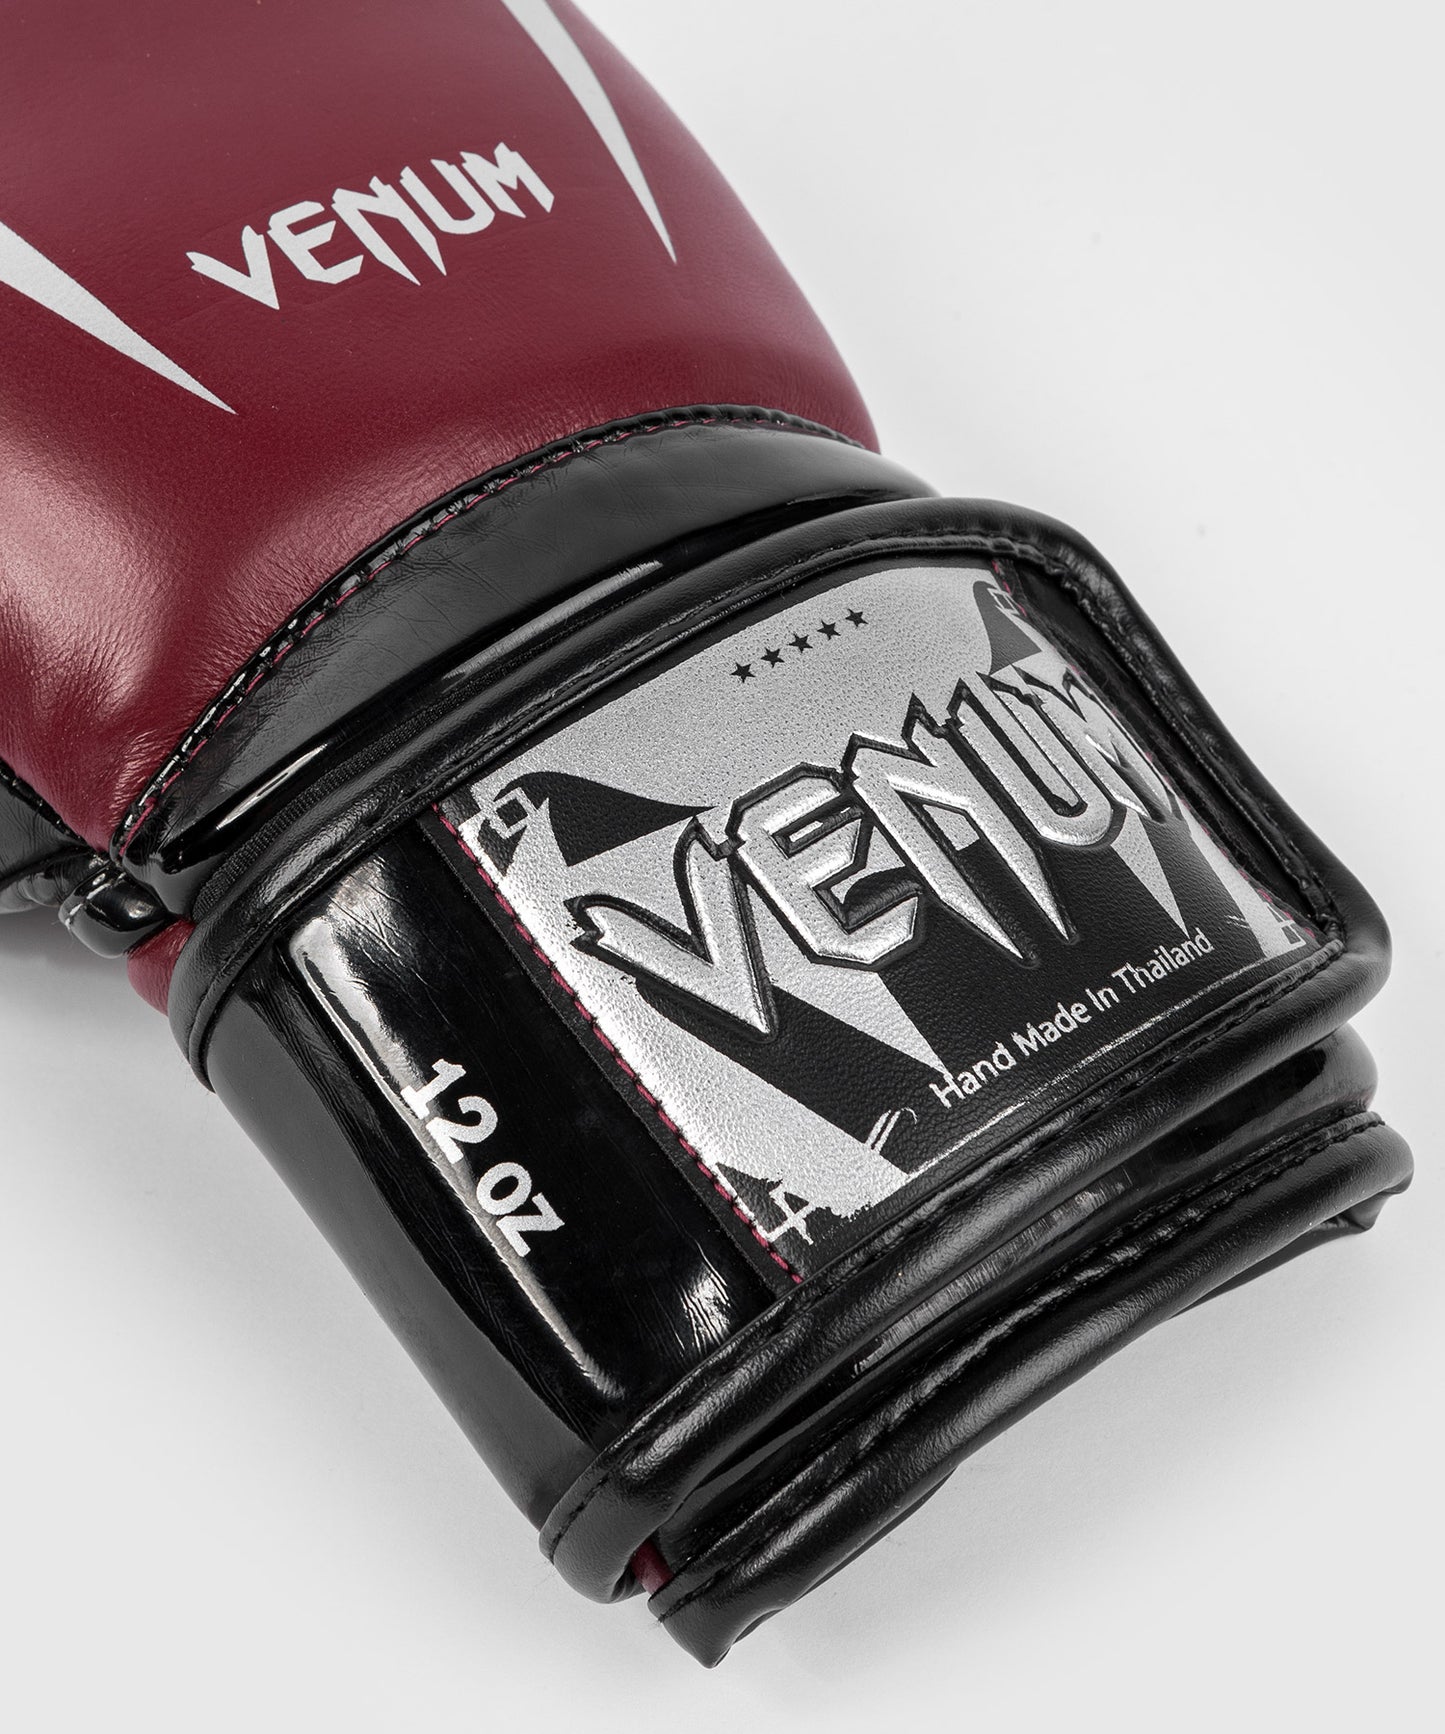 Venum Giant 3.0 Boxhandschuhe - Limited Edition